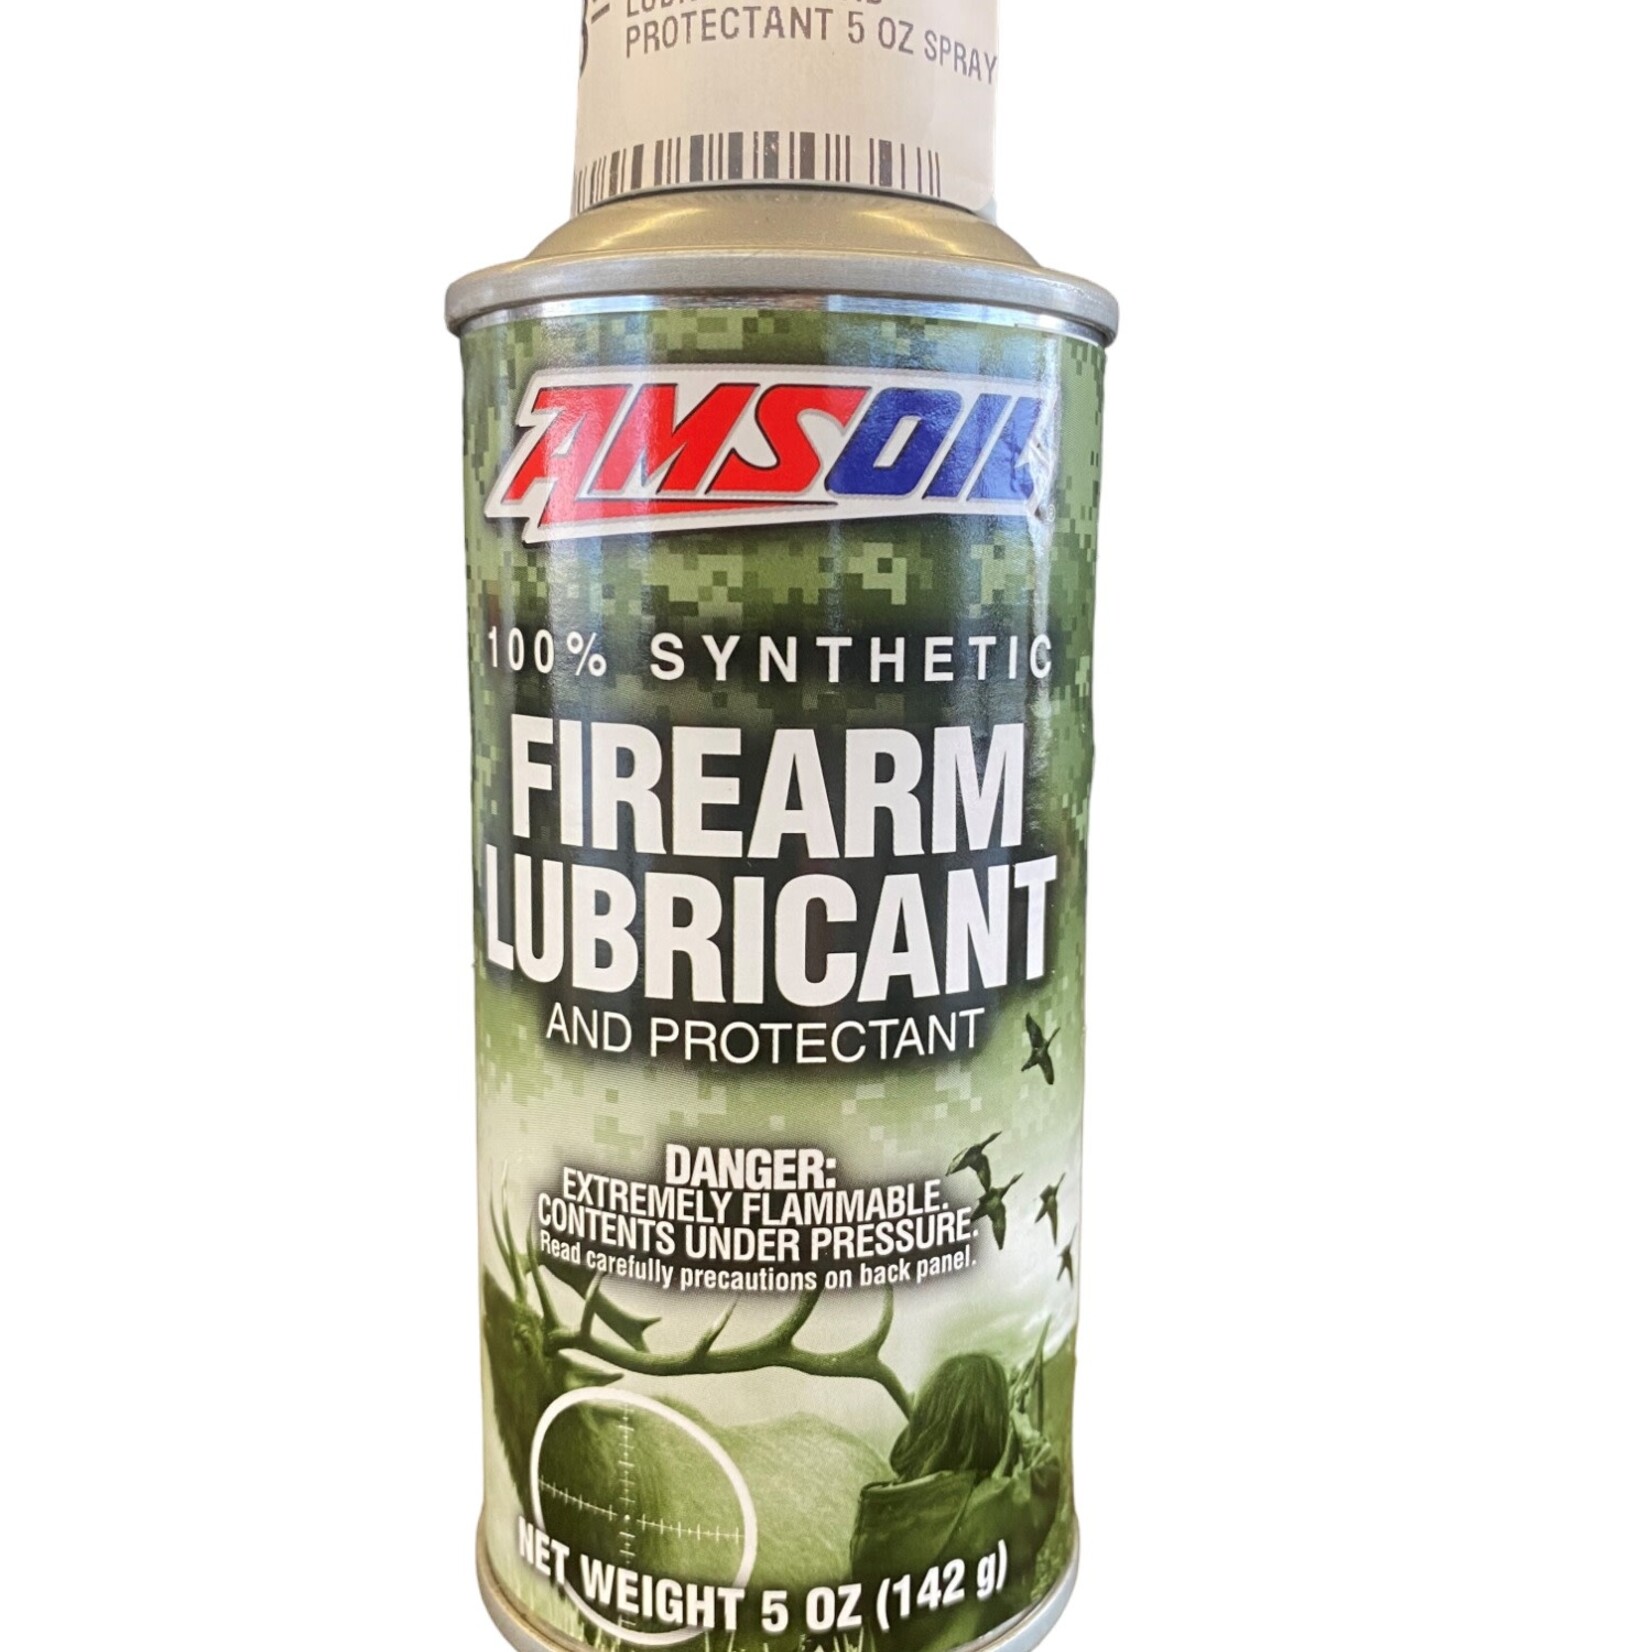 AMSOIL AMSOIL FIREARM LUBRICANT AND PROTECTANT 5 OZ SPRAY